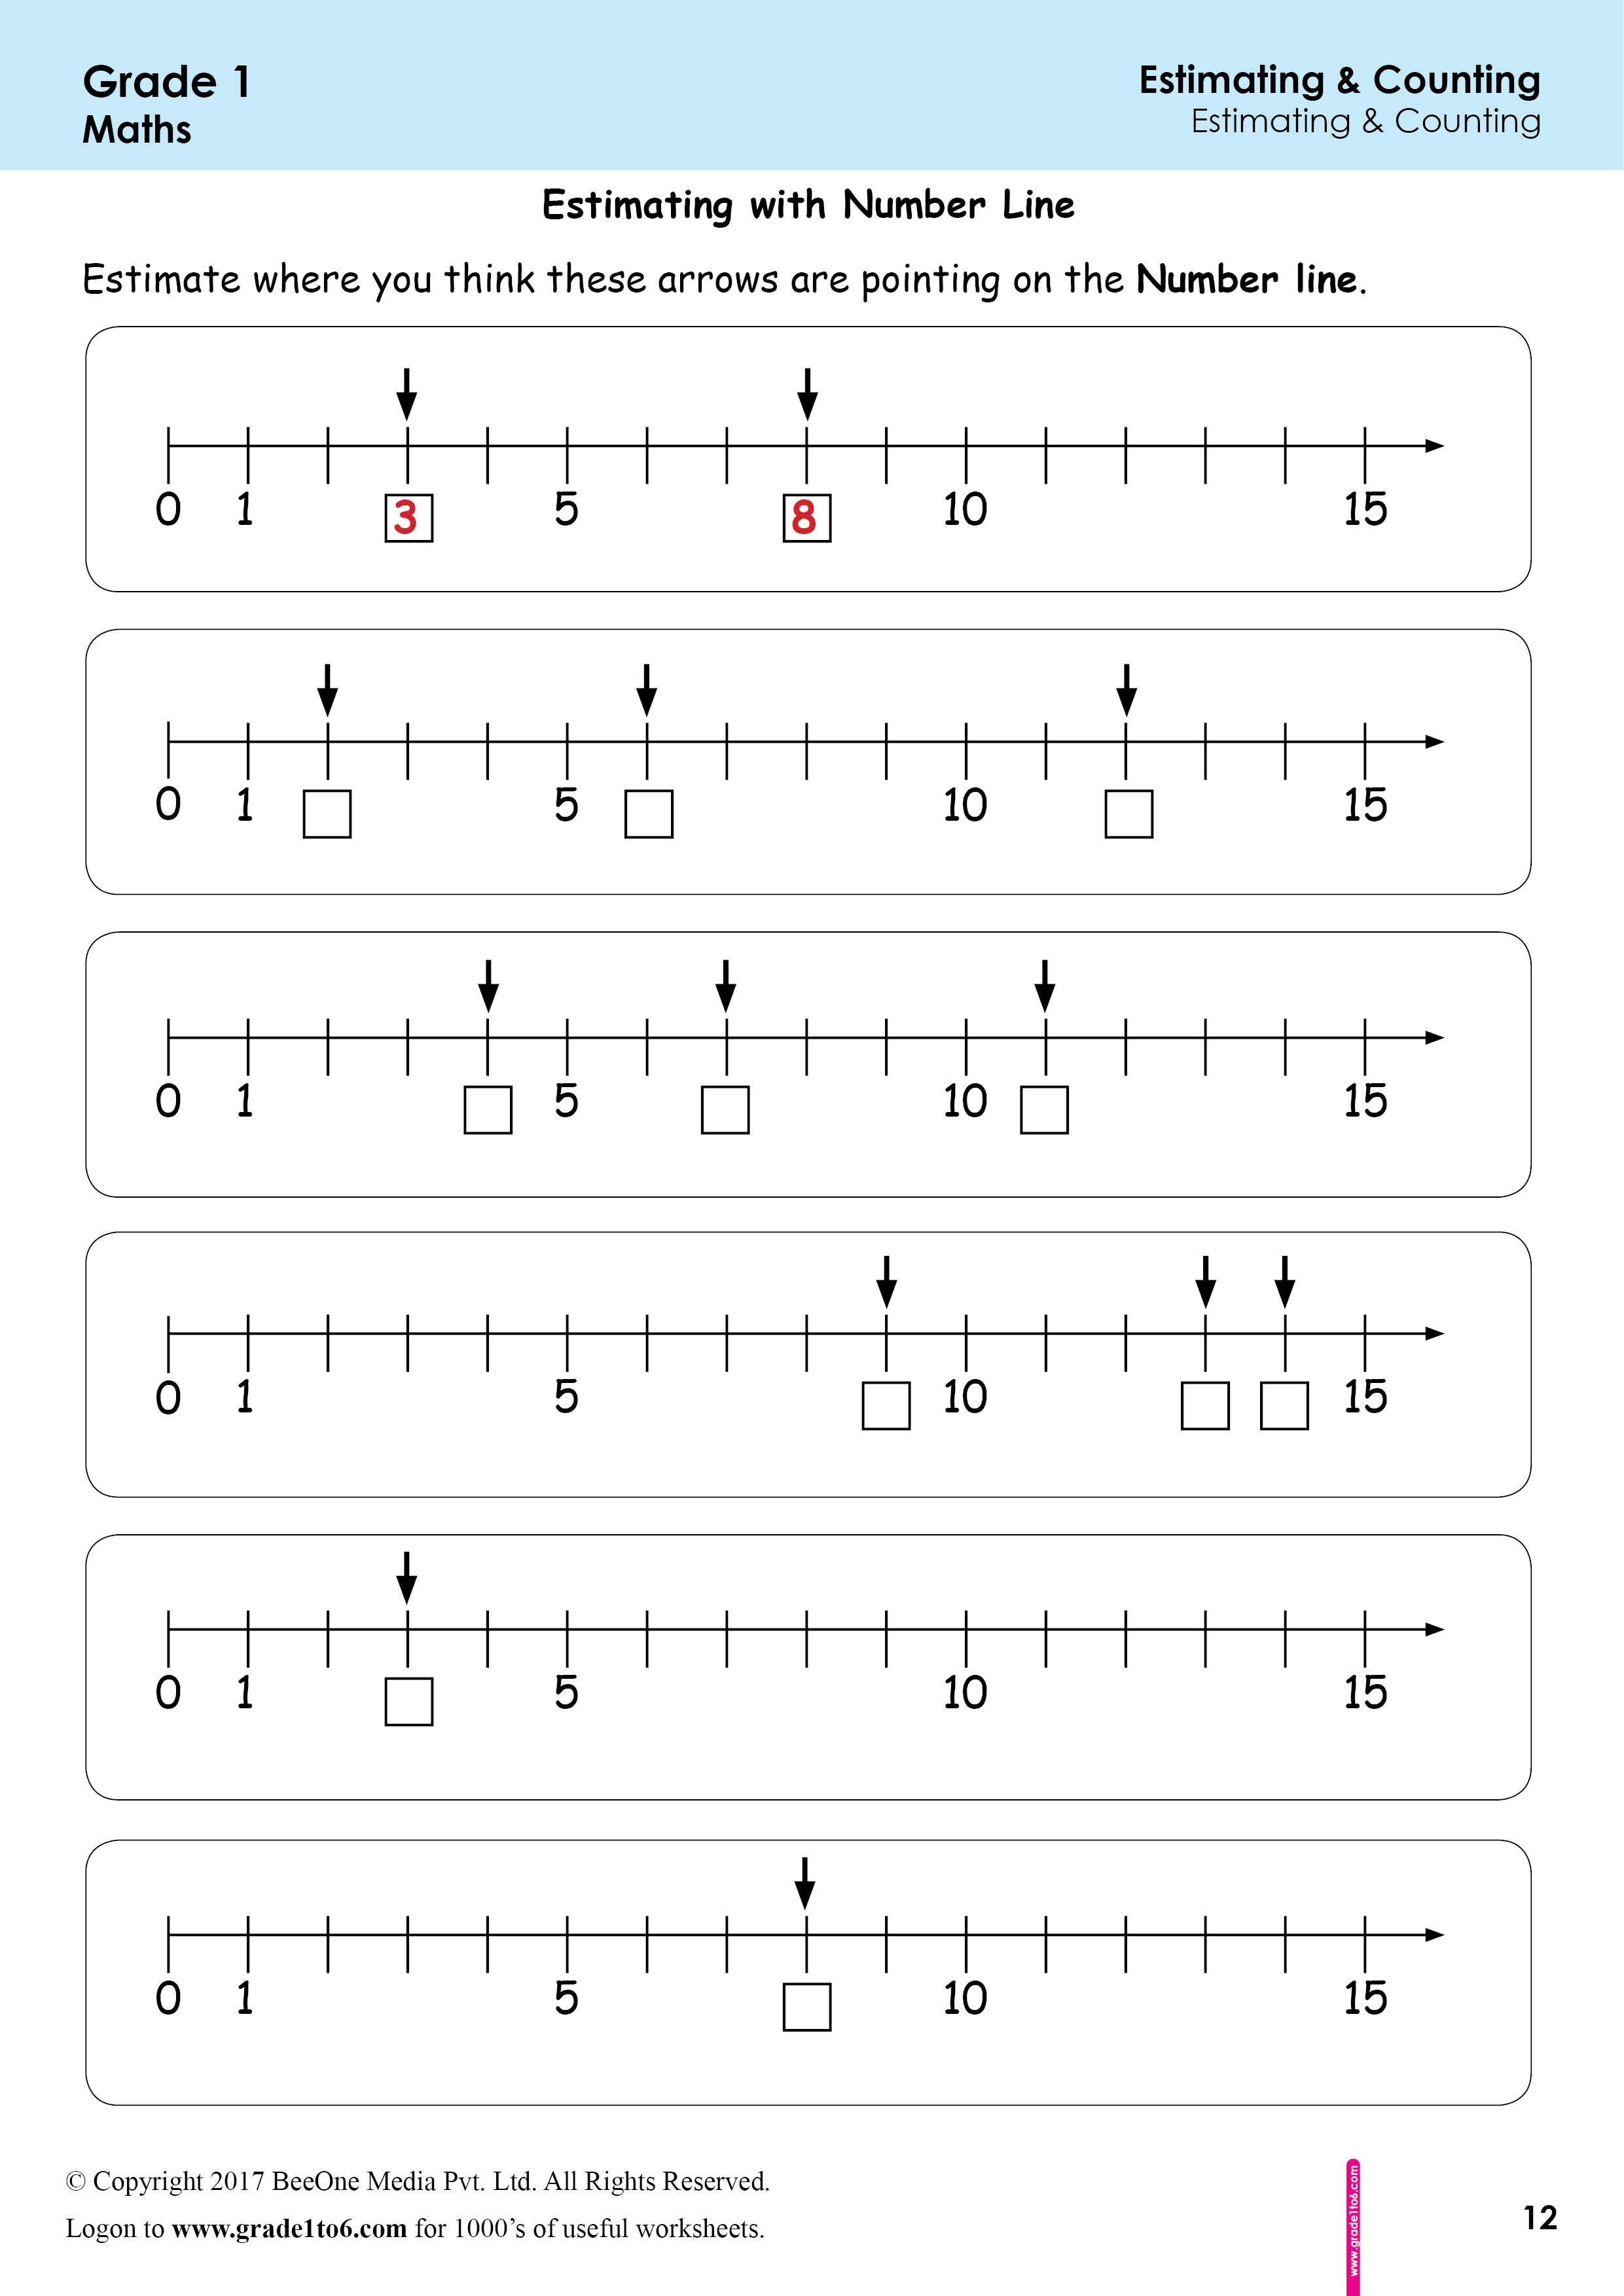 Counting Estimating Worksheets www grade1to6